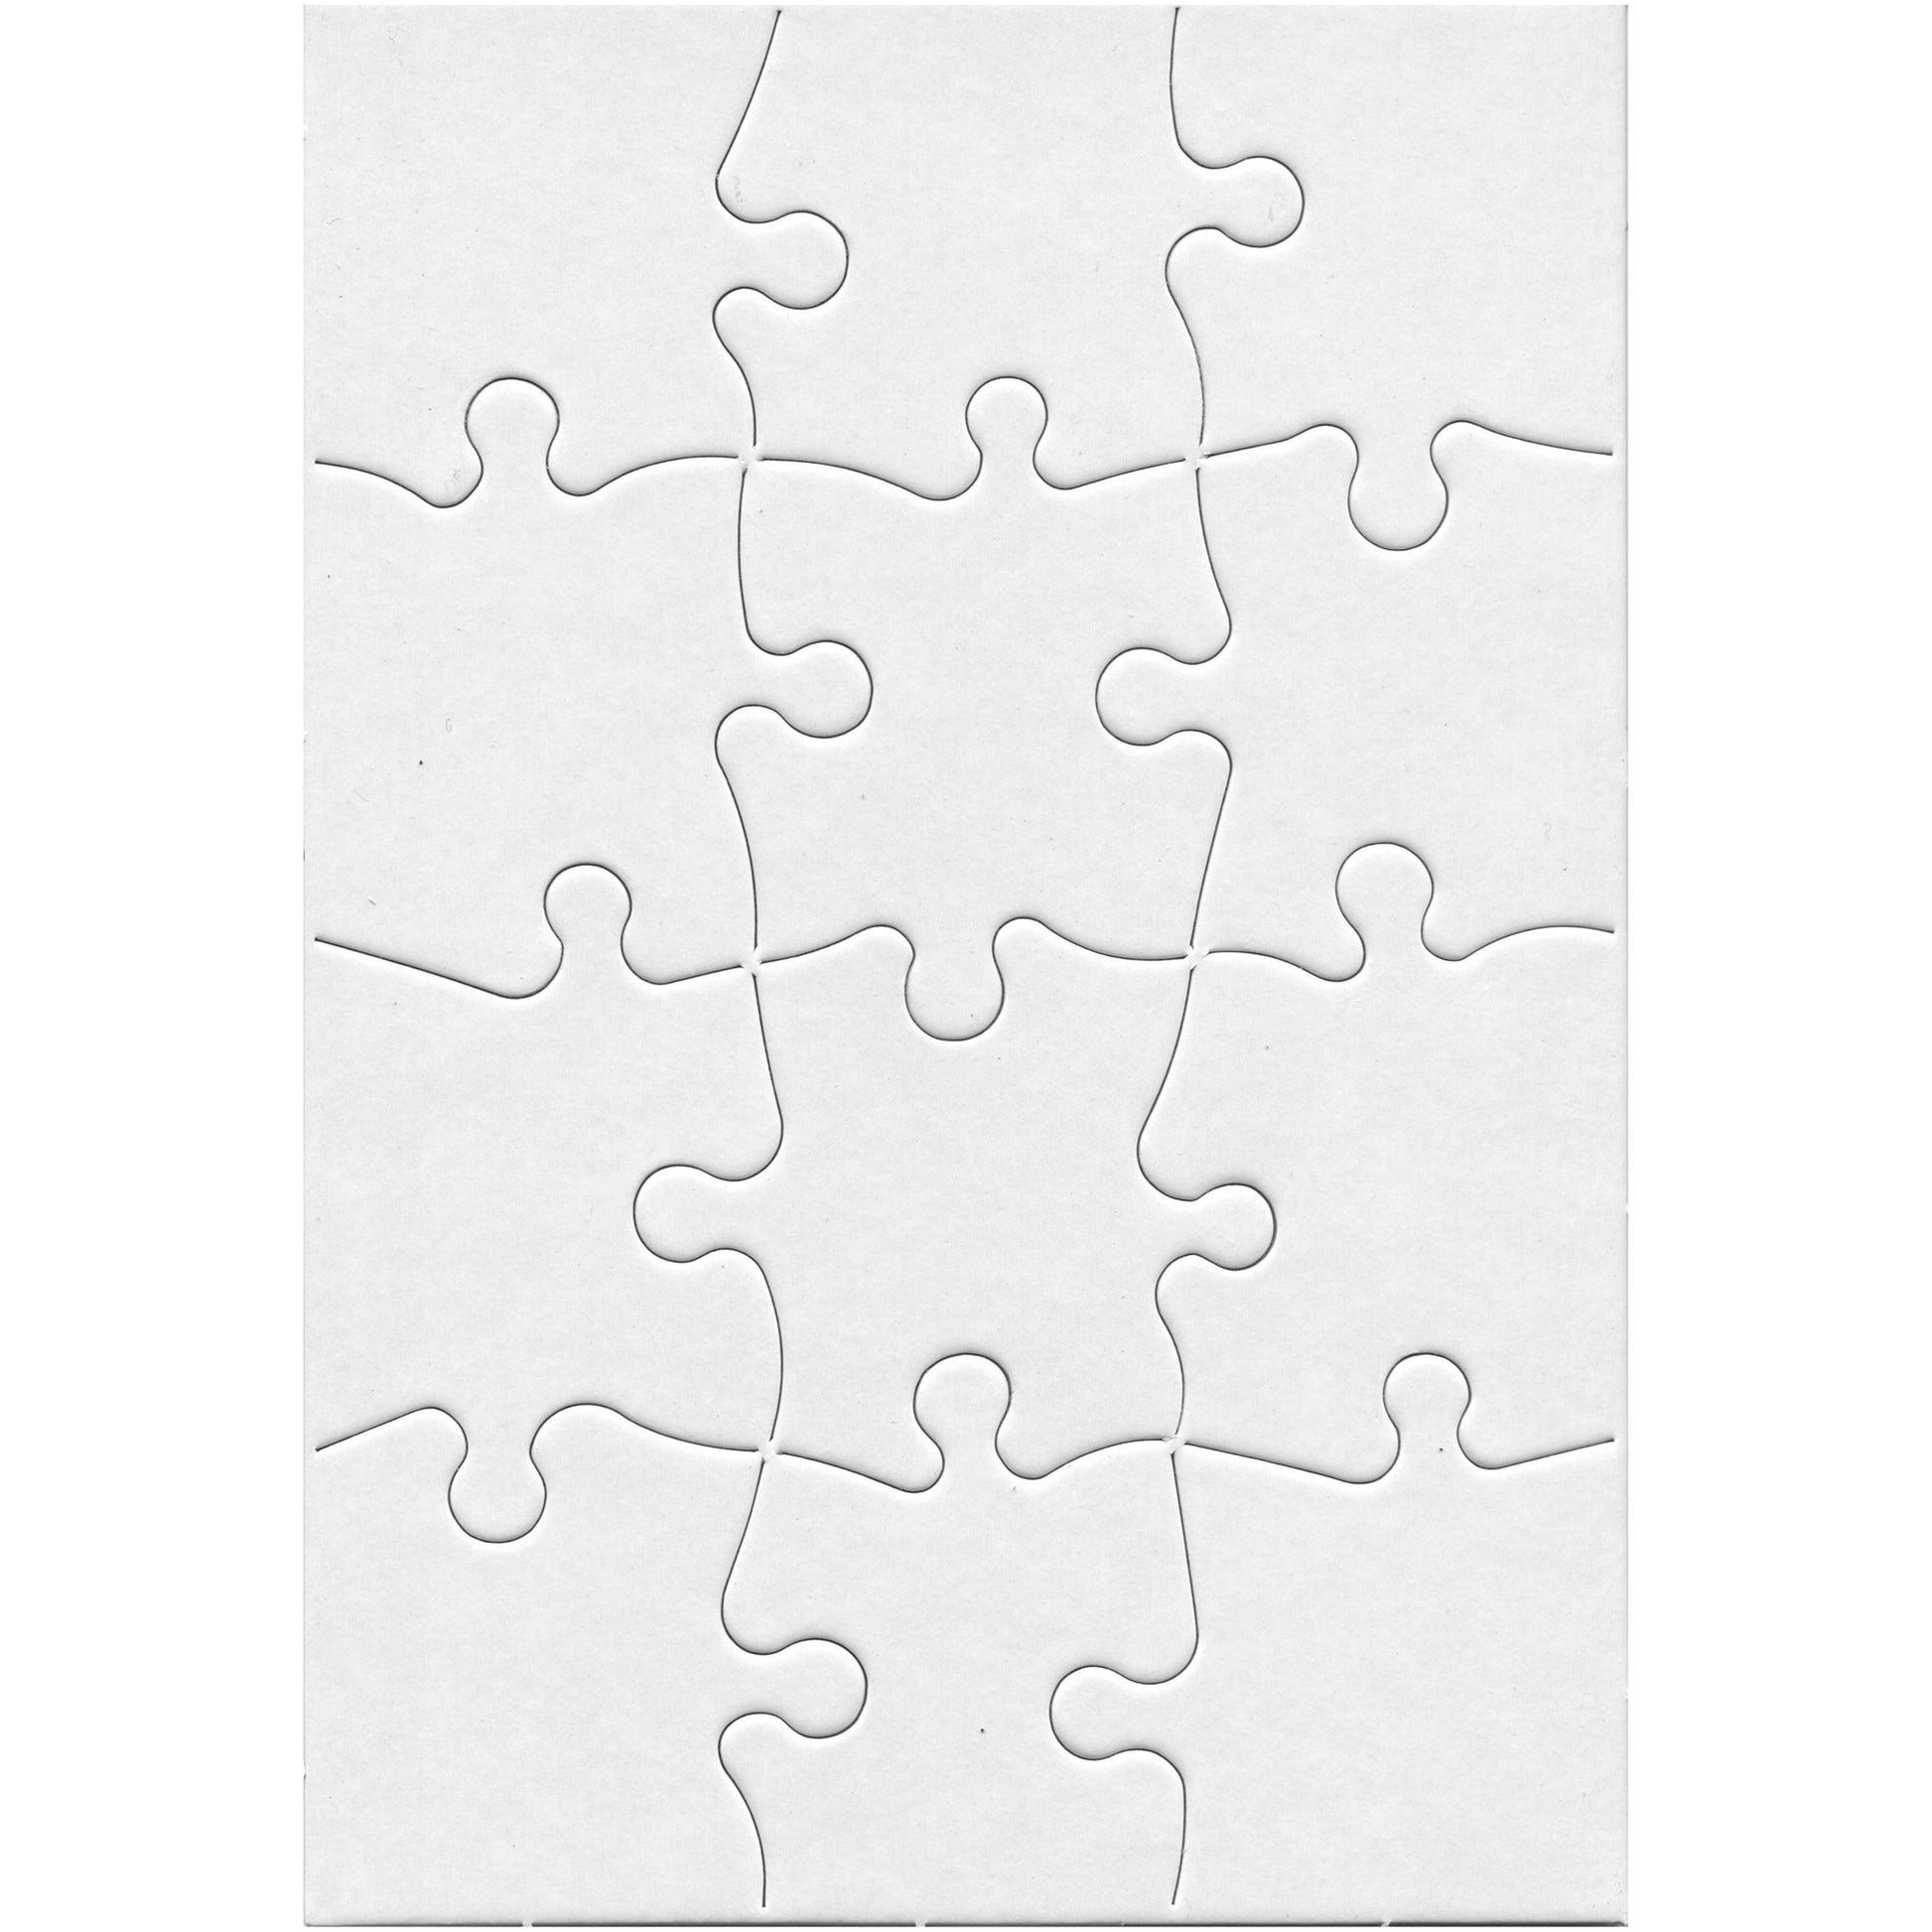 Compoz-A-Puzzle®, 5 1/2" x 8" Rectangle, 12-Piece, Pack of 24 - Loomini